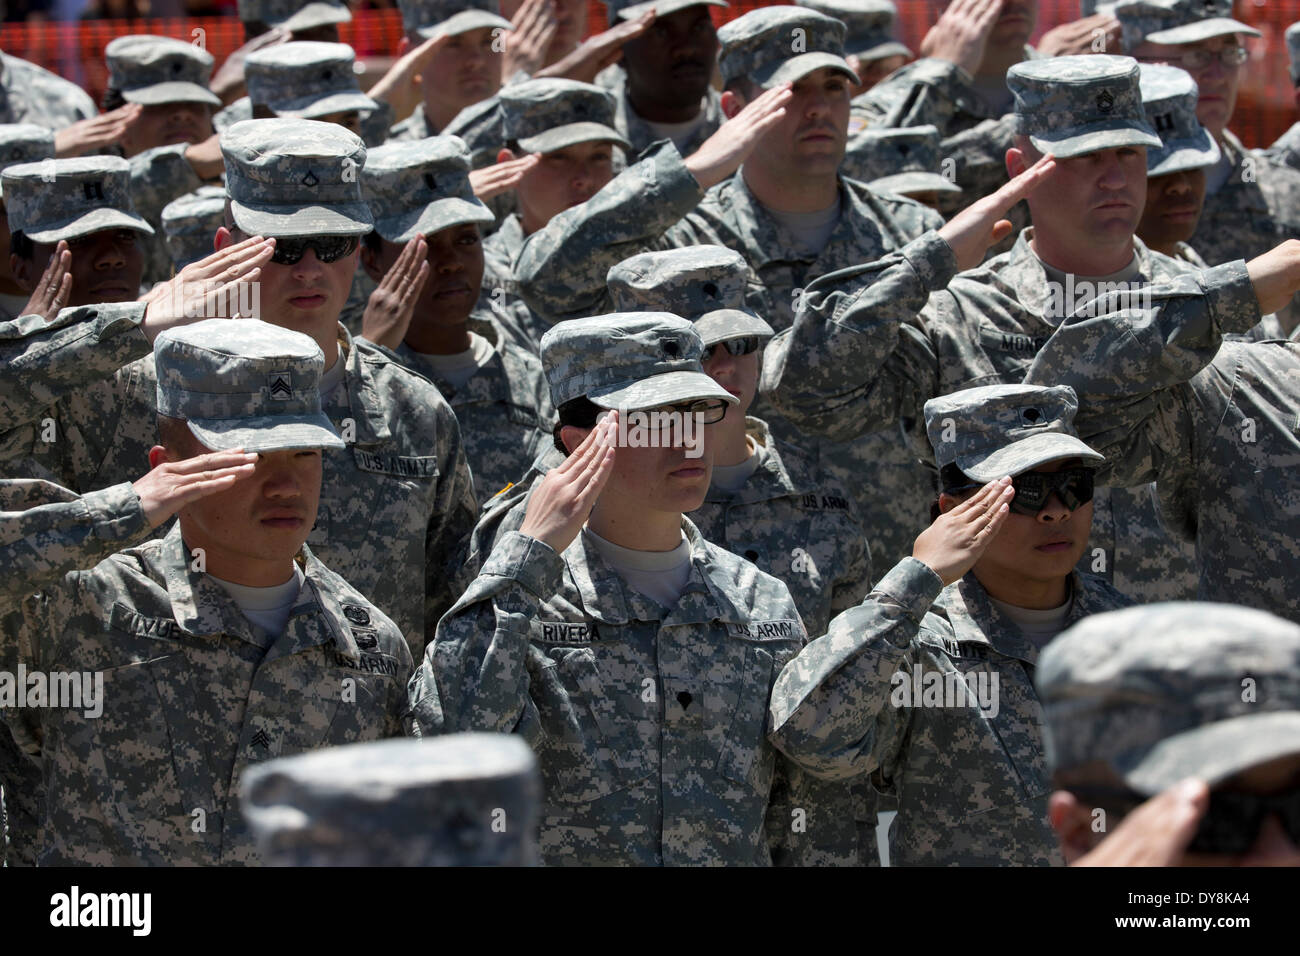 U.S. Army soldiers salute during memorial service for fellow soldiers killed in shooting at Fort Hood Army Post in Texas Stock Photo